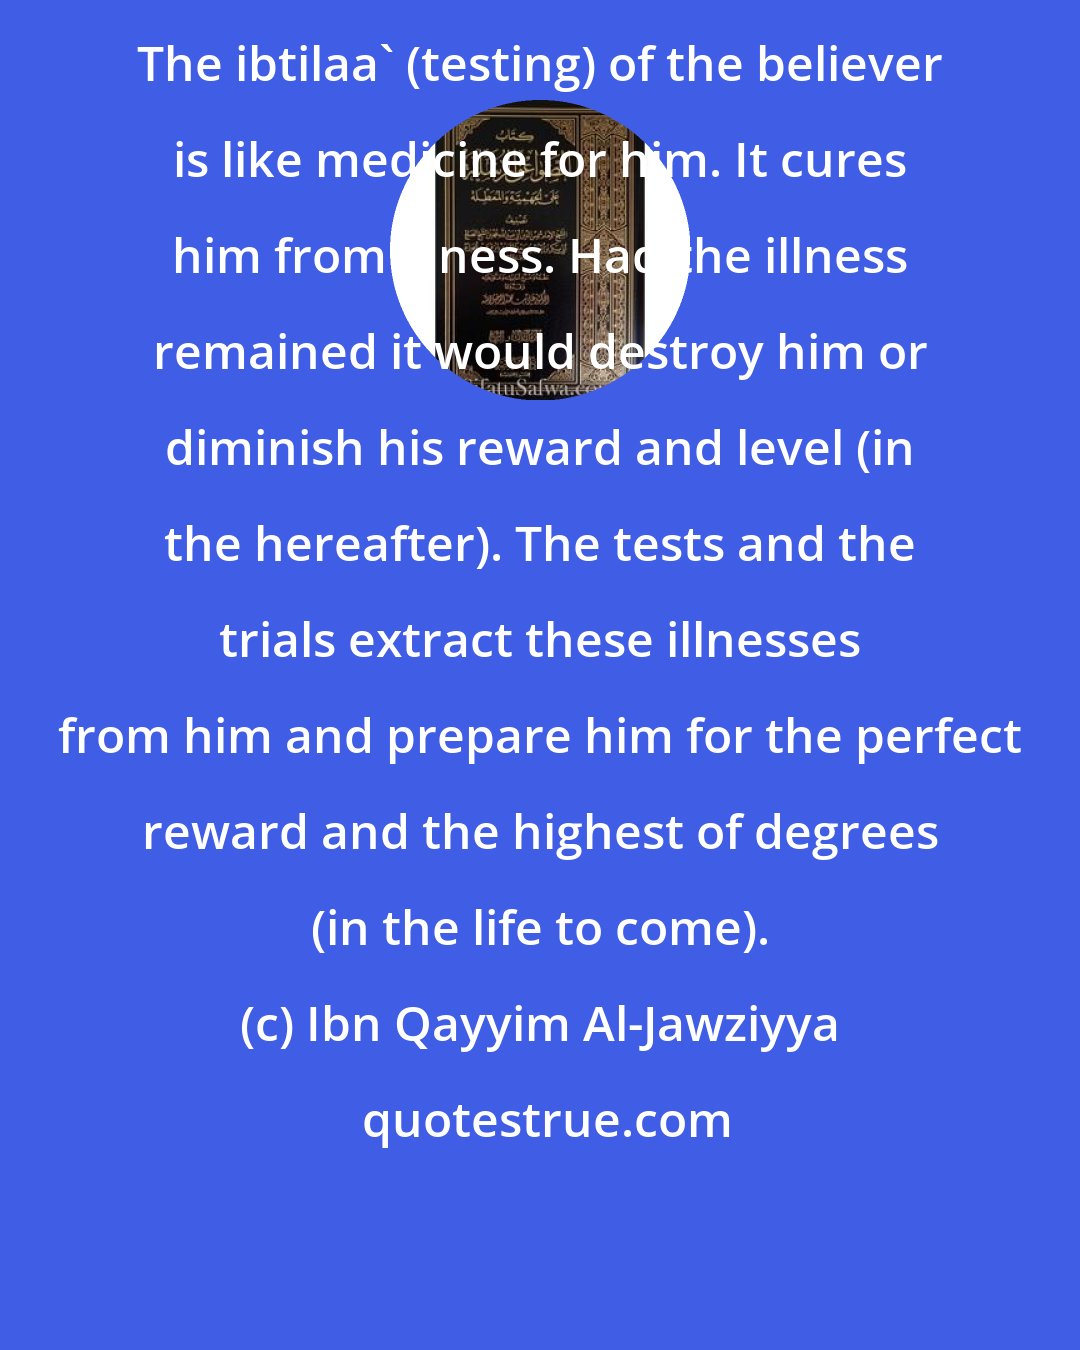 Ibn Qayyim Al-Jawziyya: The ibtilaa' (testing) of the believer is like medicine for him. It cures him from illness. Had the illness remained it would destroy him or diminish his reward and level (in the hereafter). The tests and the trials extract these illnesses from him and prepare him for the perfect reward and the highest of degrees (in the life to come).